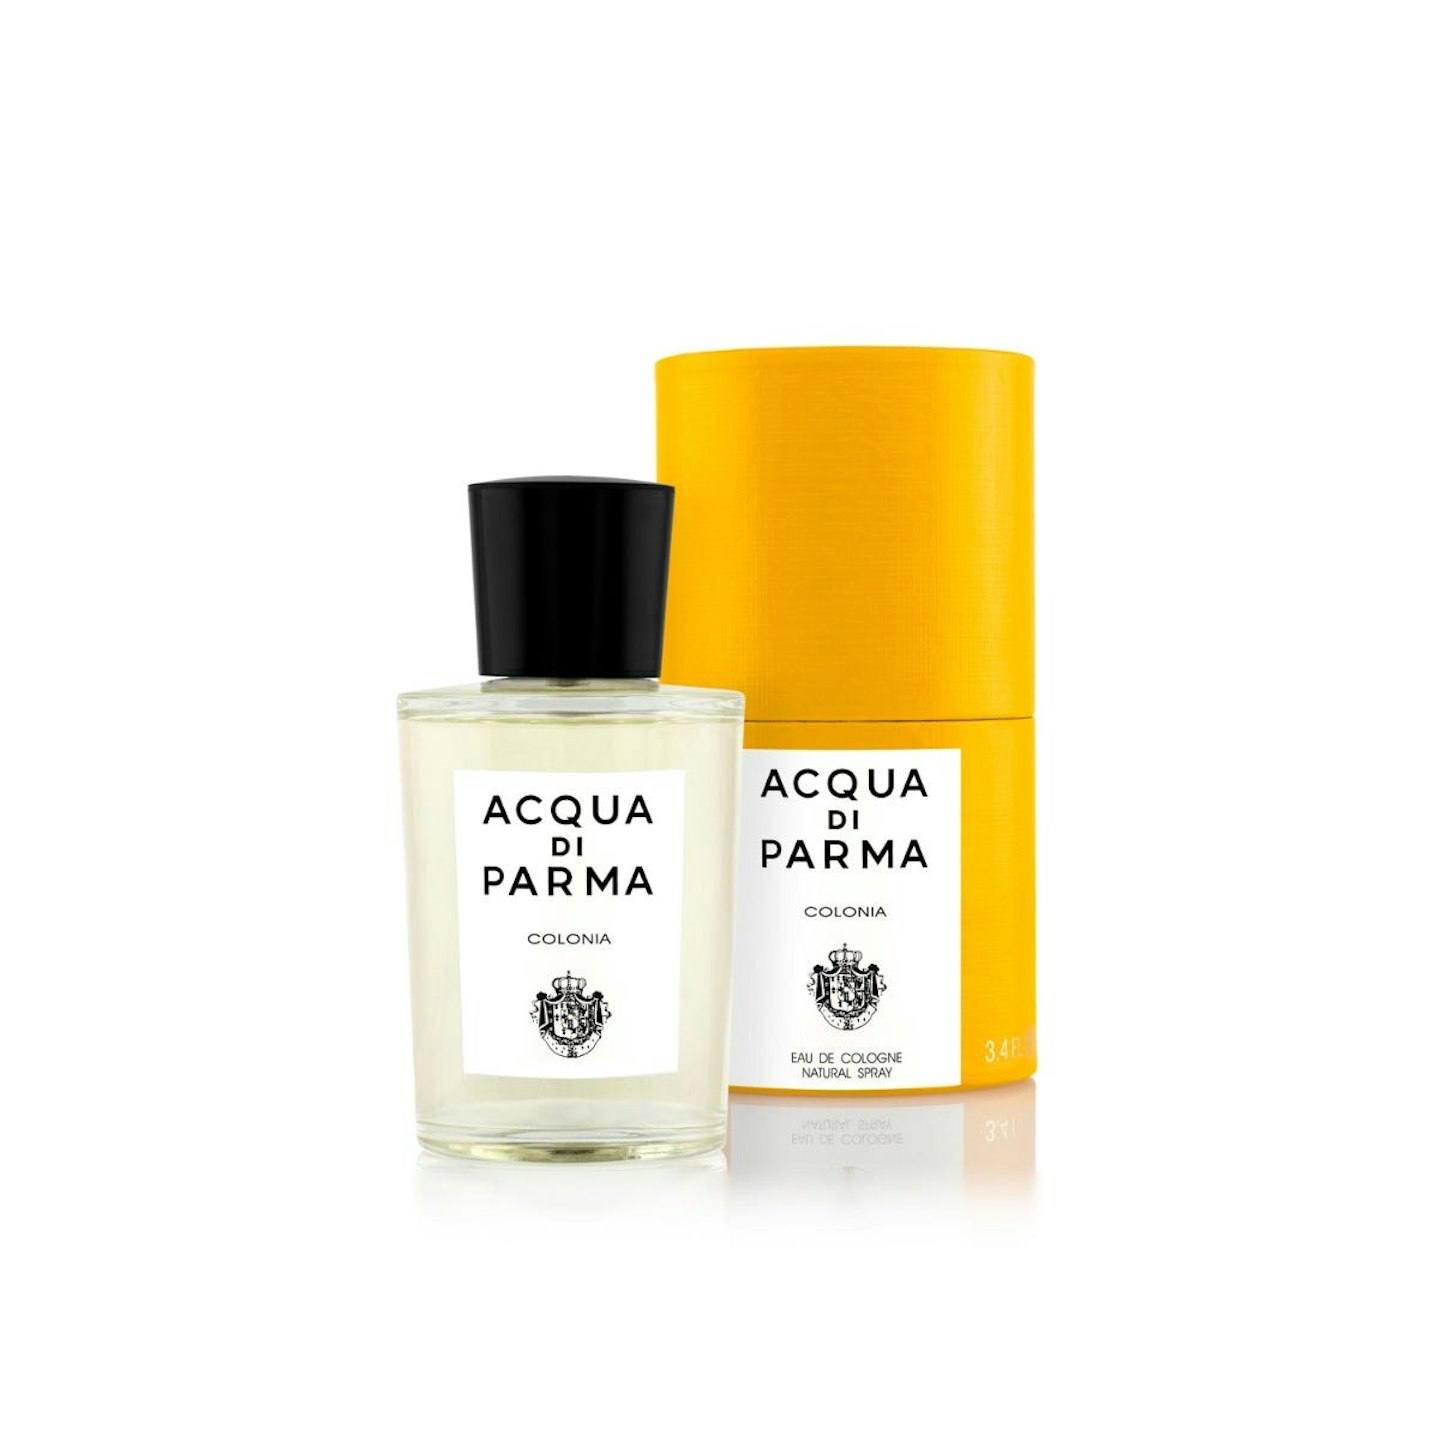 Aldi fans are dashing to pick up 3 new dupes of the fancy Acqua di Parma  perfumes that are 98% cheaper than the original